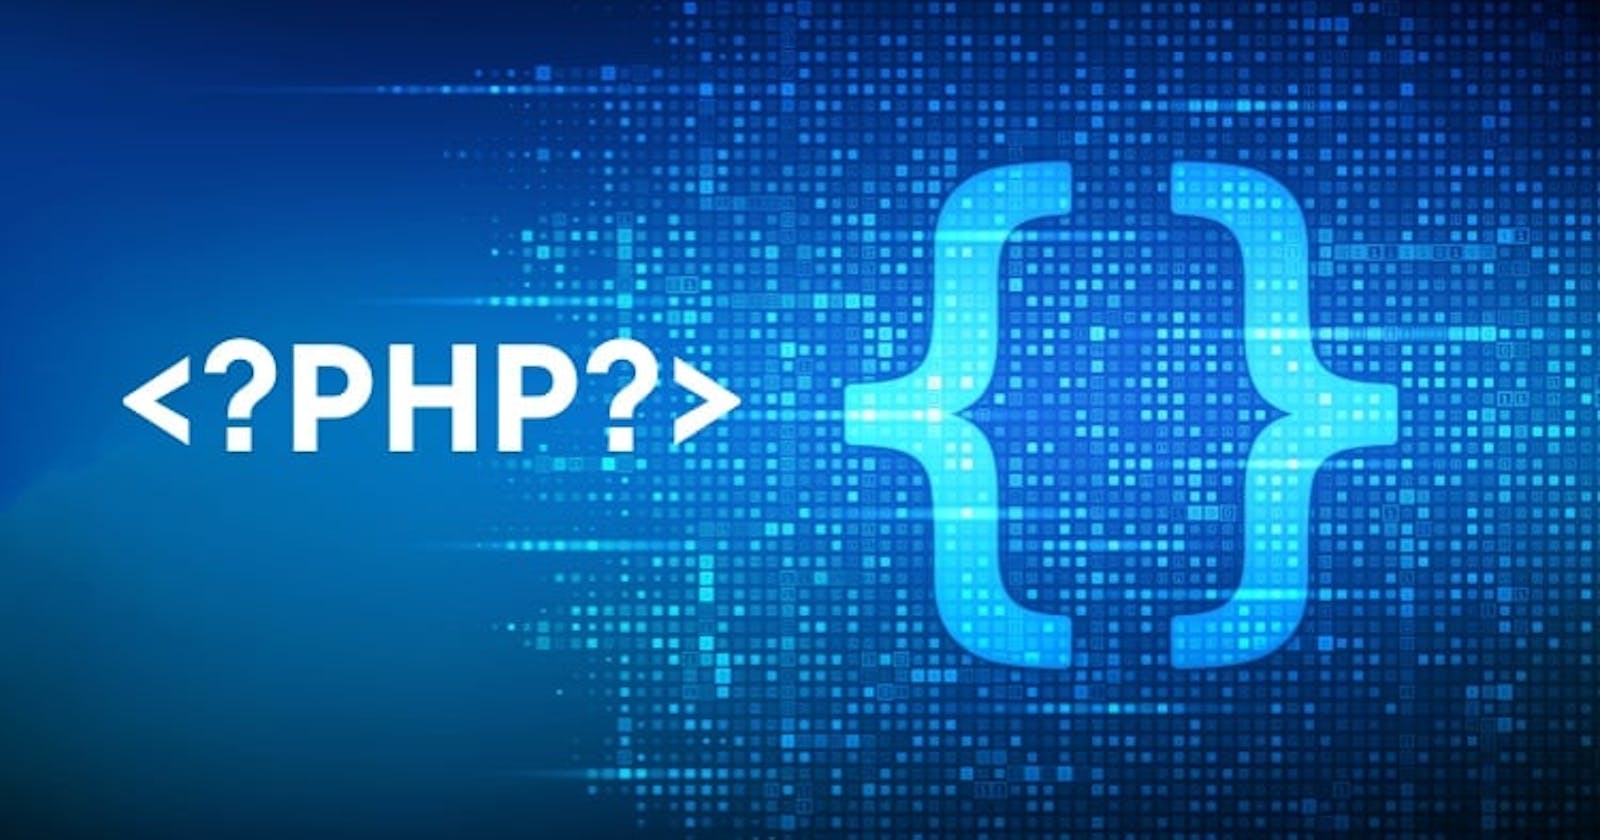 How To Detect Errors In PHP